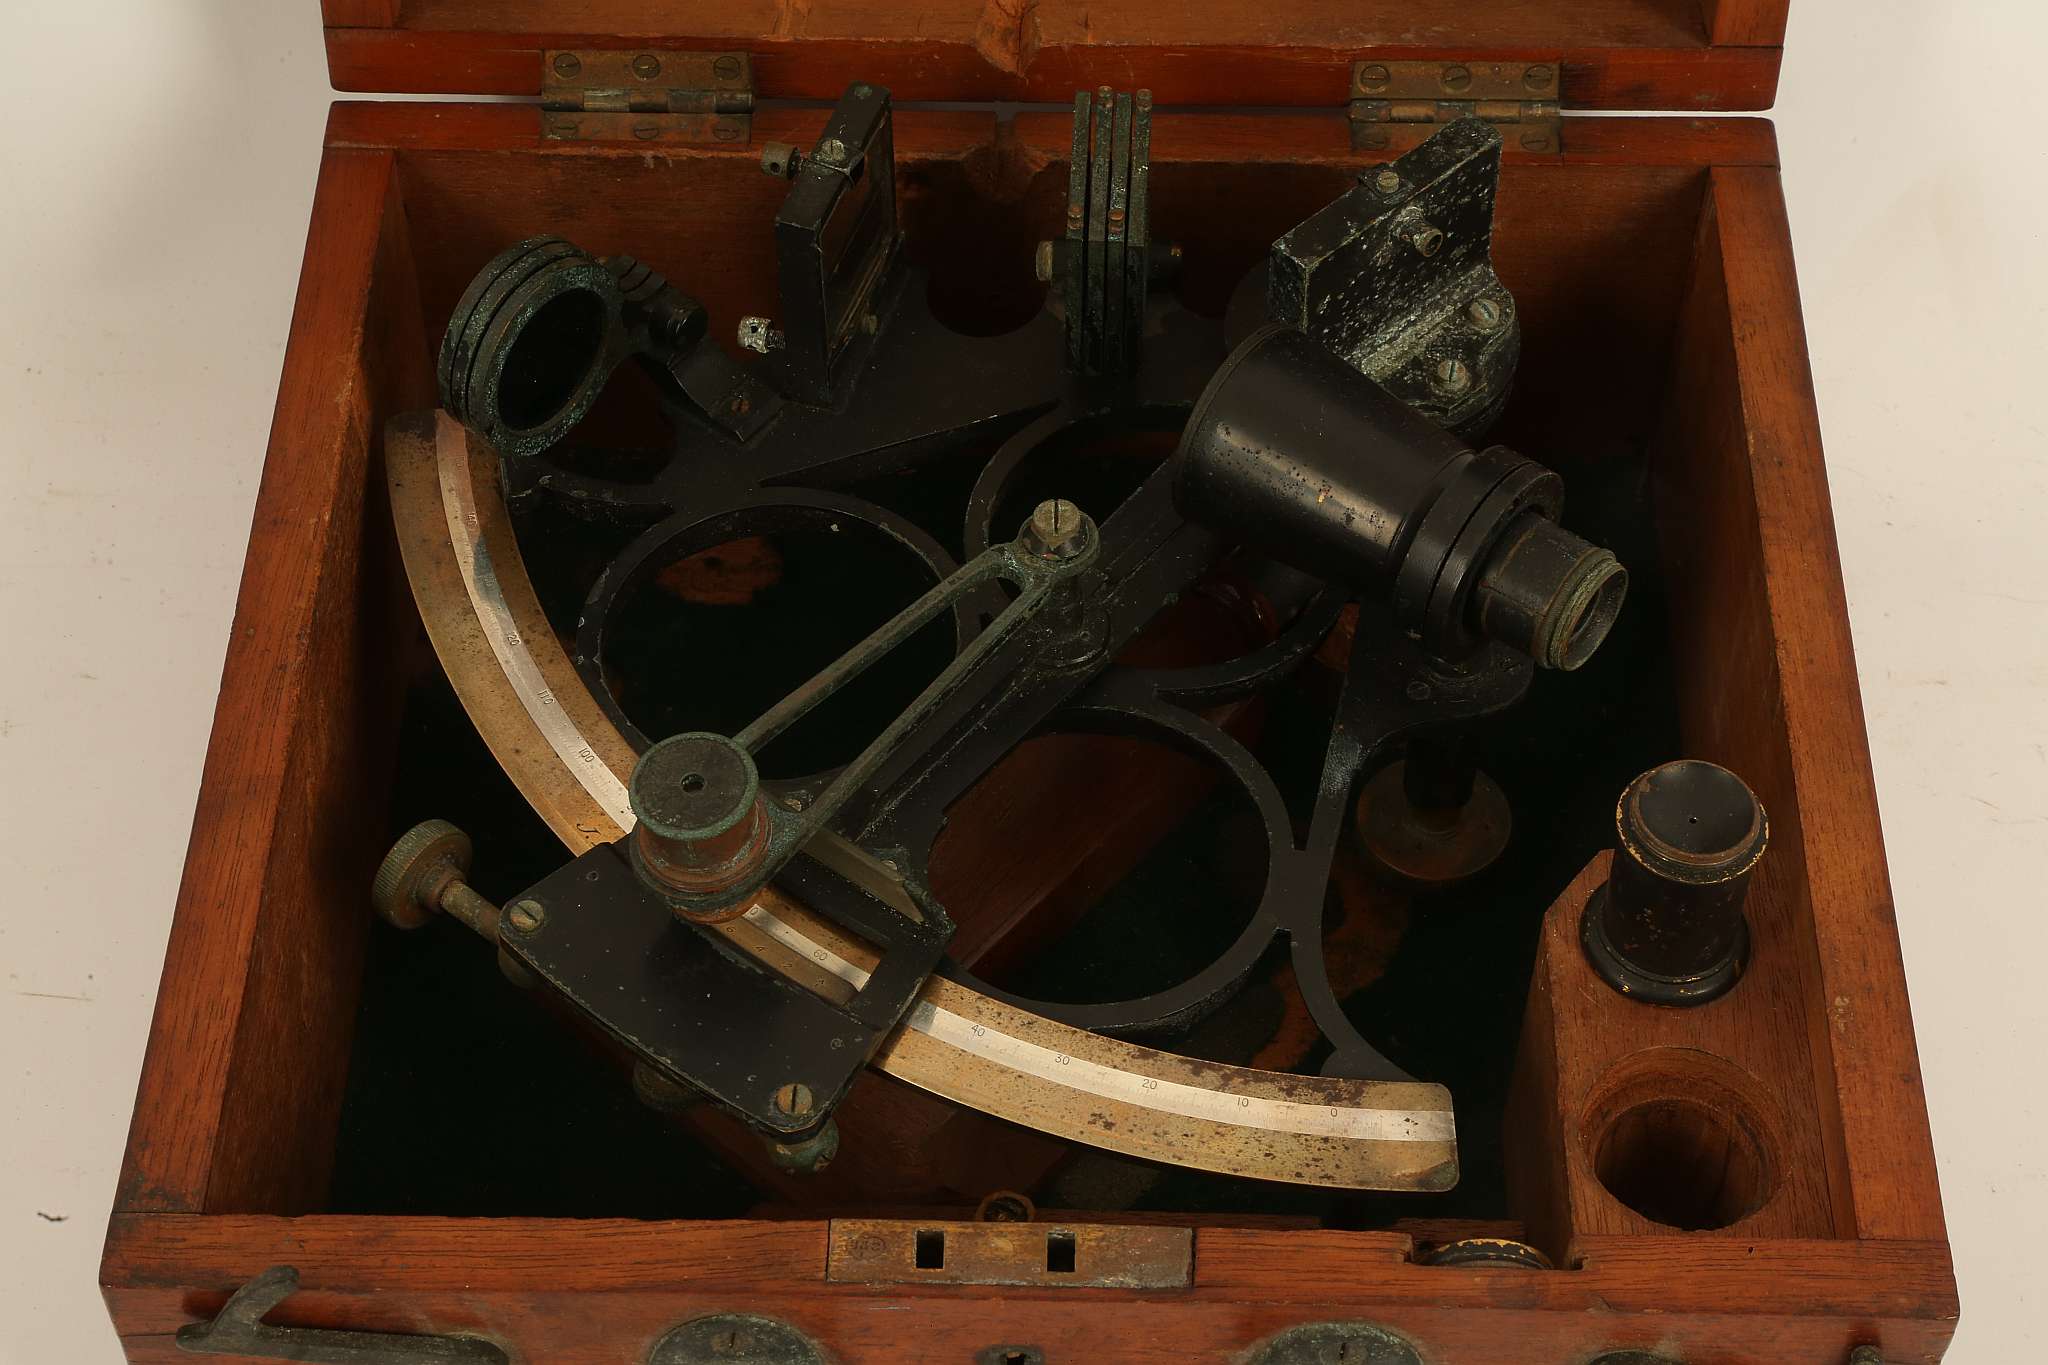 A J. DURKIN OF MIDDLESBOROUGH SEXTANT, in its original wooden box, with two sighting lenses (tubes), - Image 3 of 3